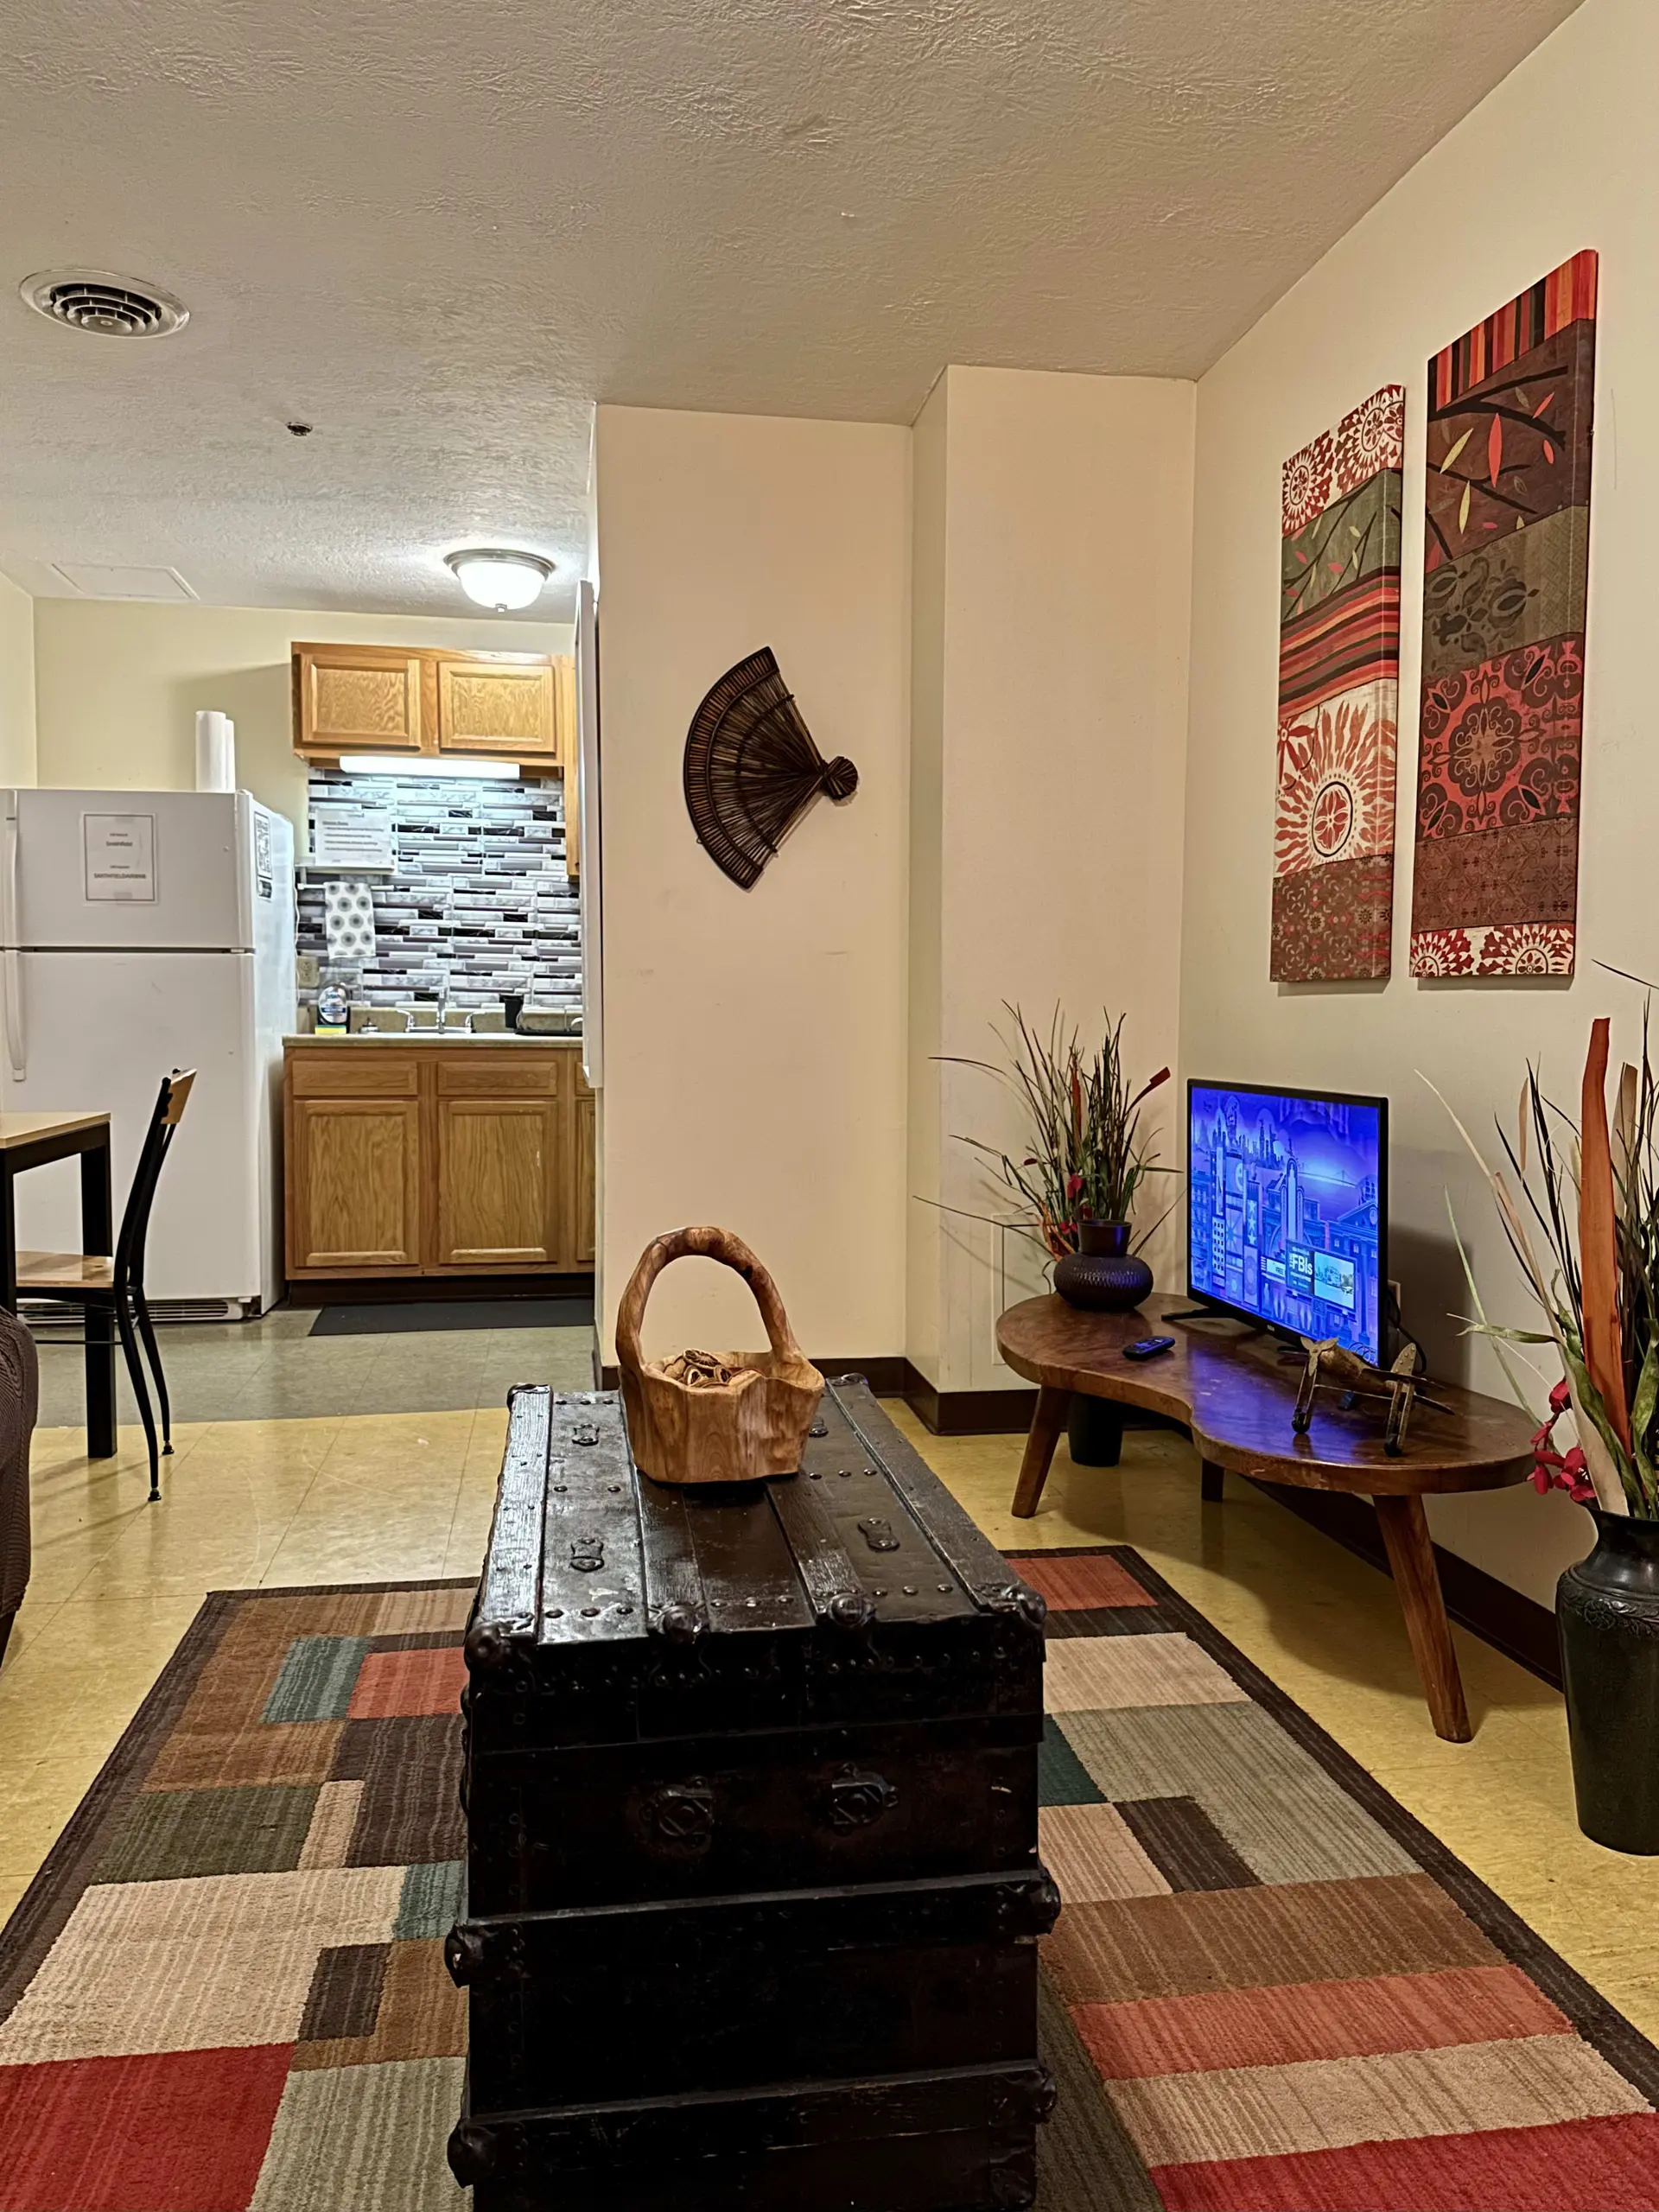 6 Beds | Downtown Apt | Very Quick Walk Everywhere